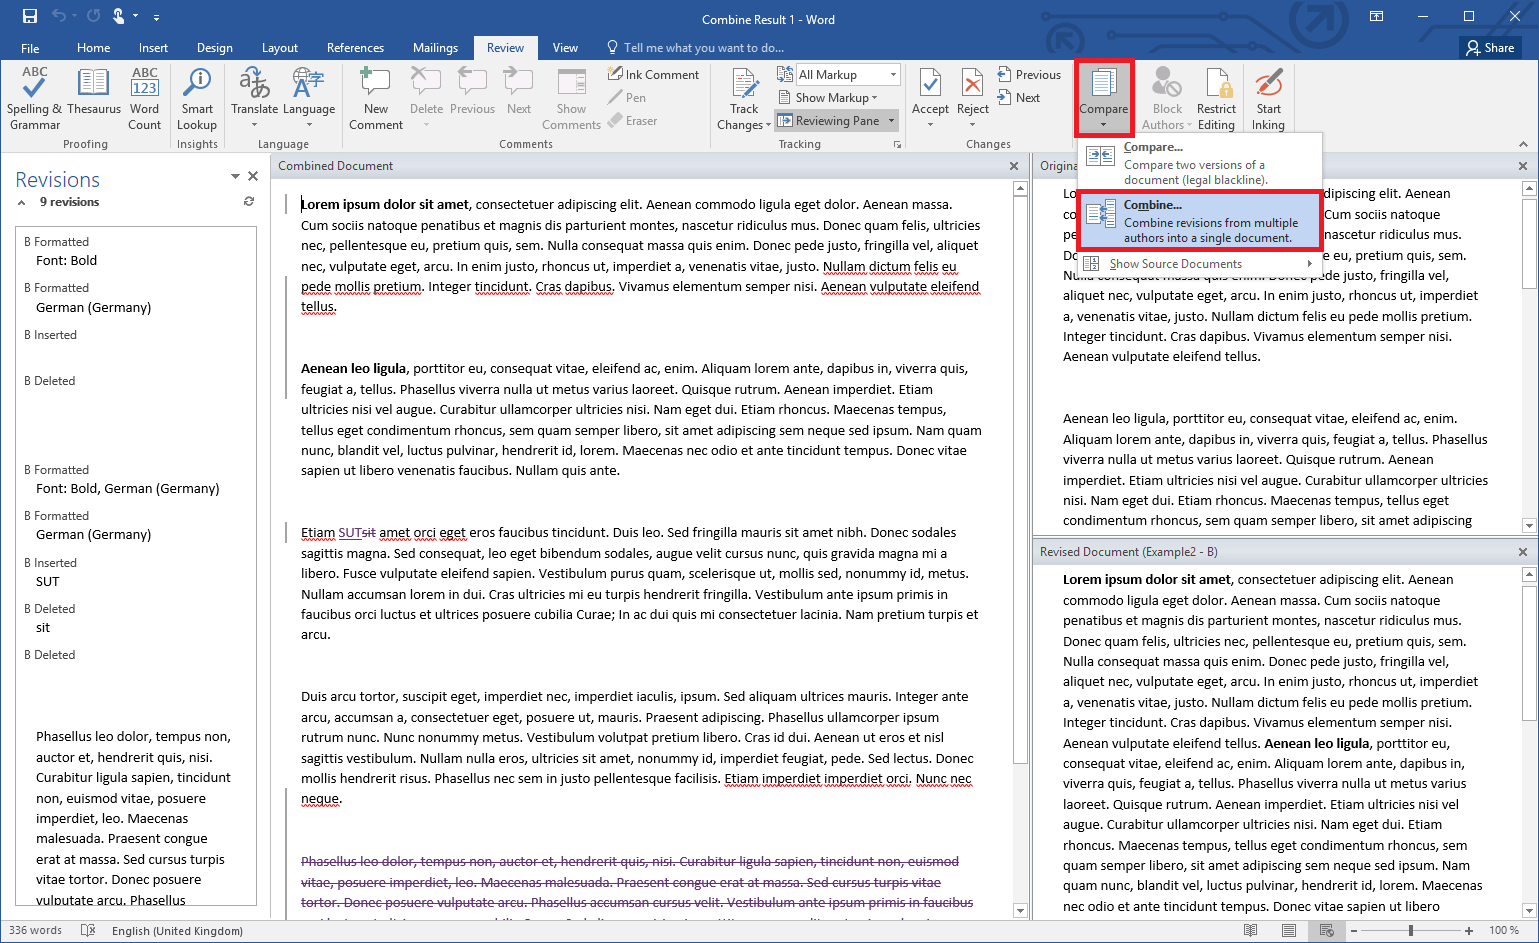 Program window where you can compare and combine Word documents